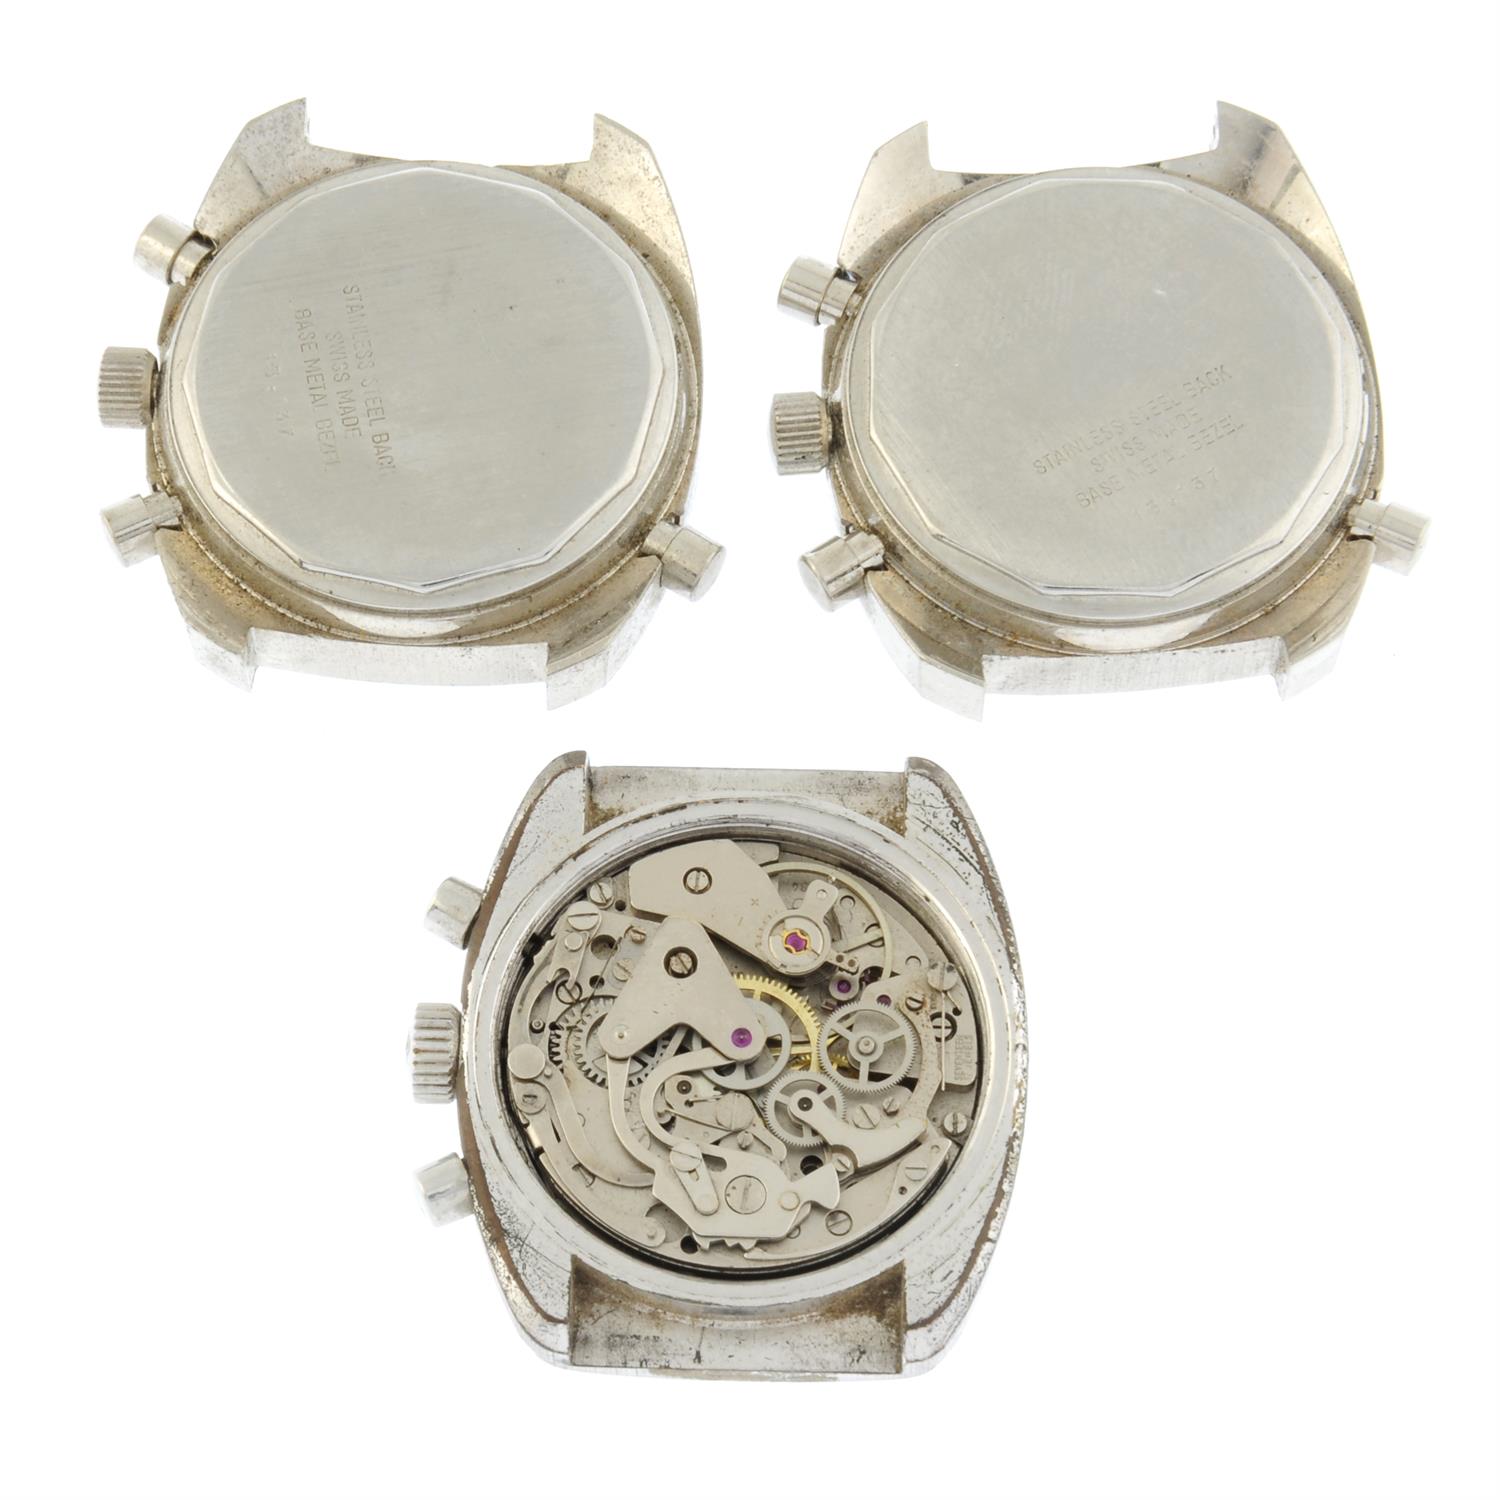 Buler - a chronograph watch (38mm) with Buler and Lanco watches. - Image 2 of 2